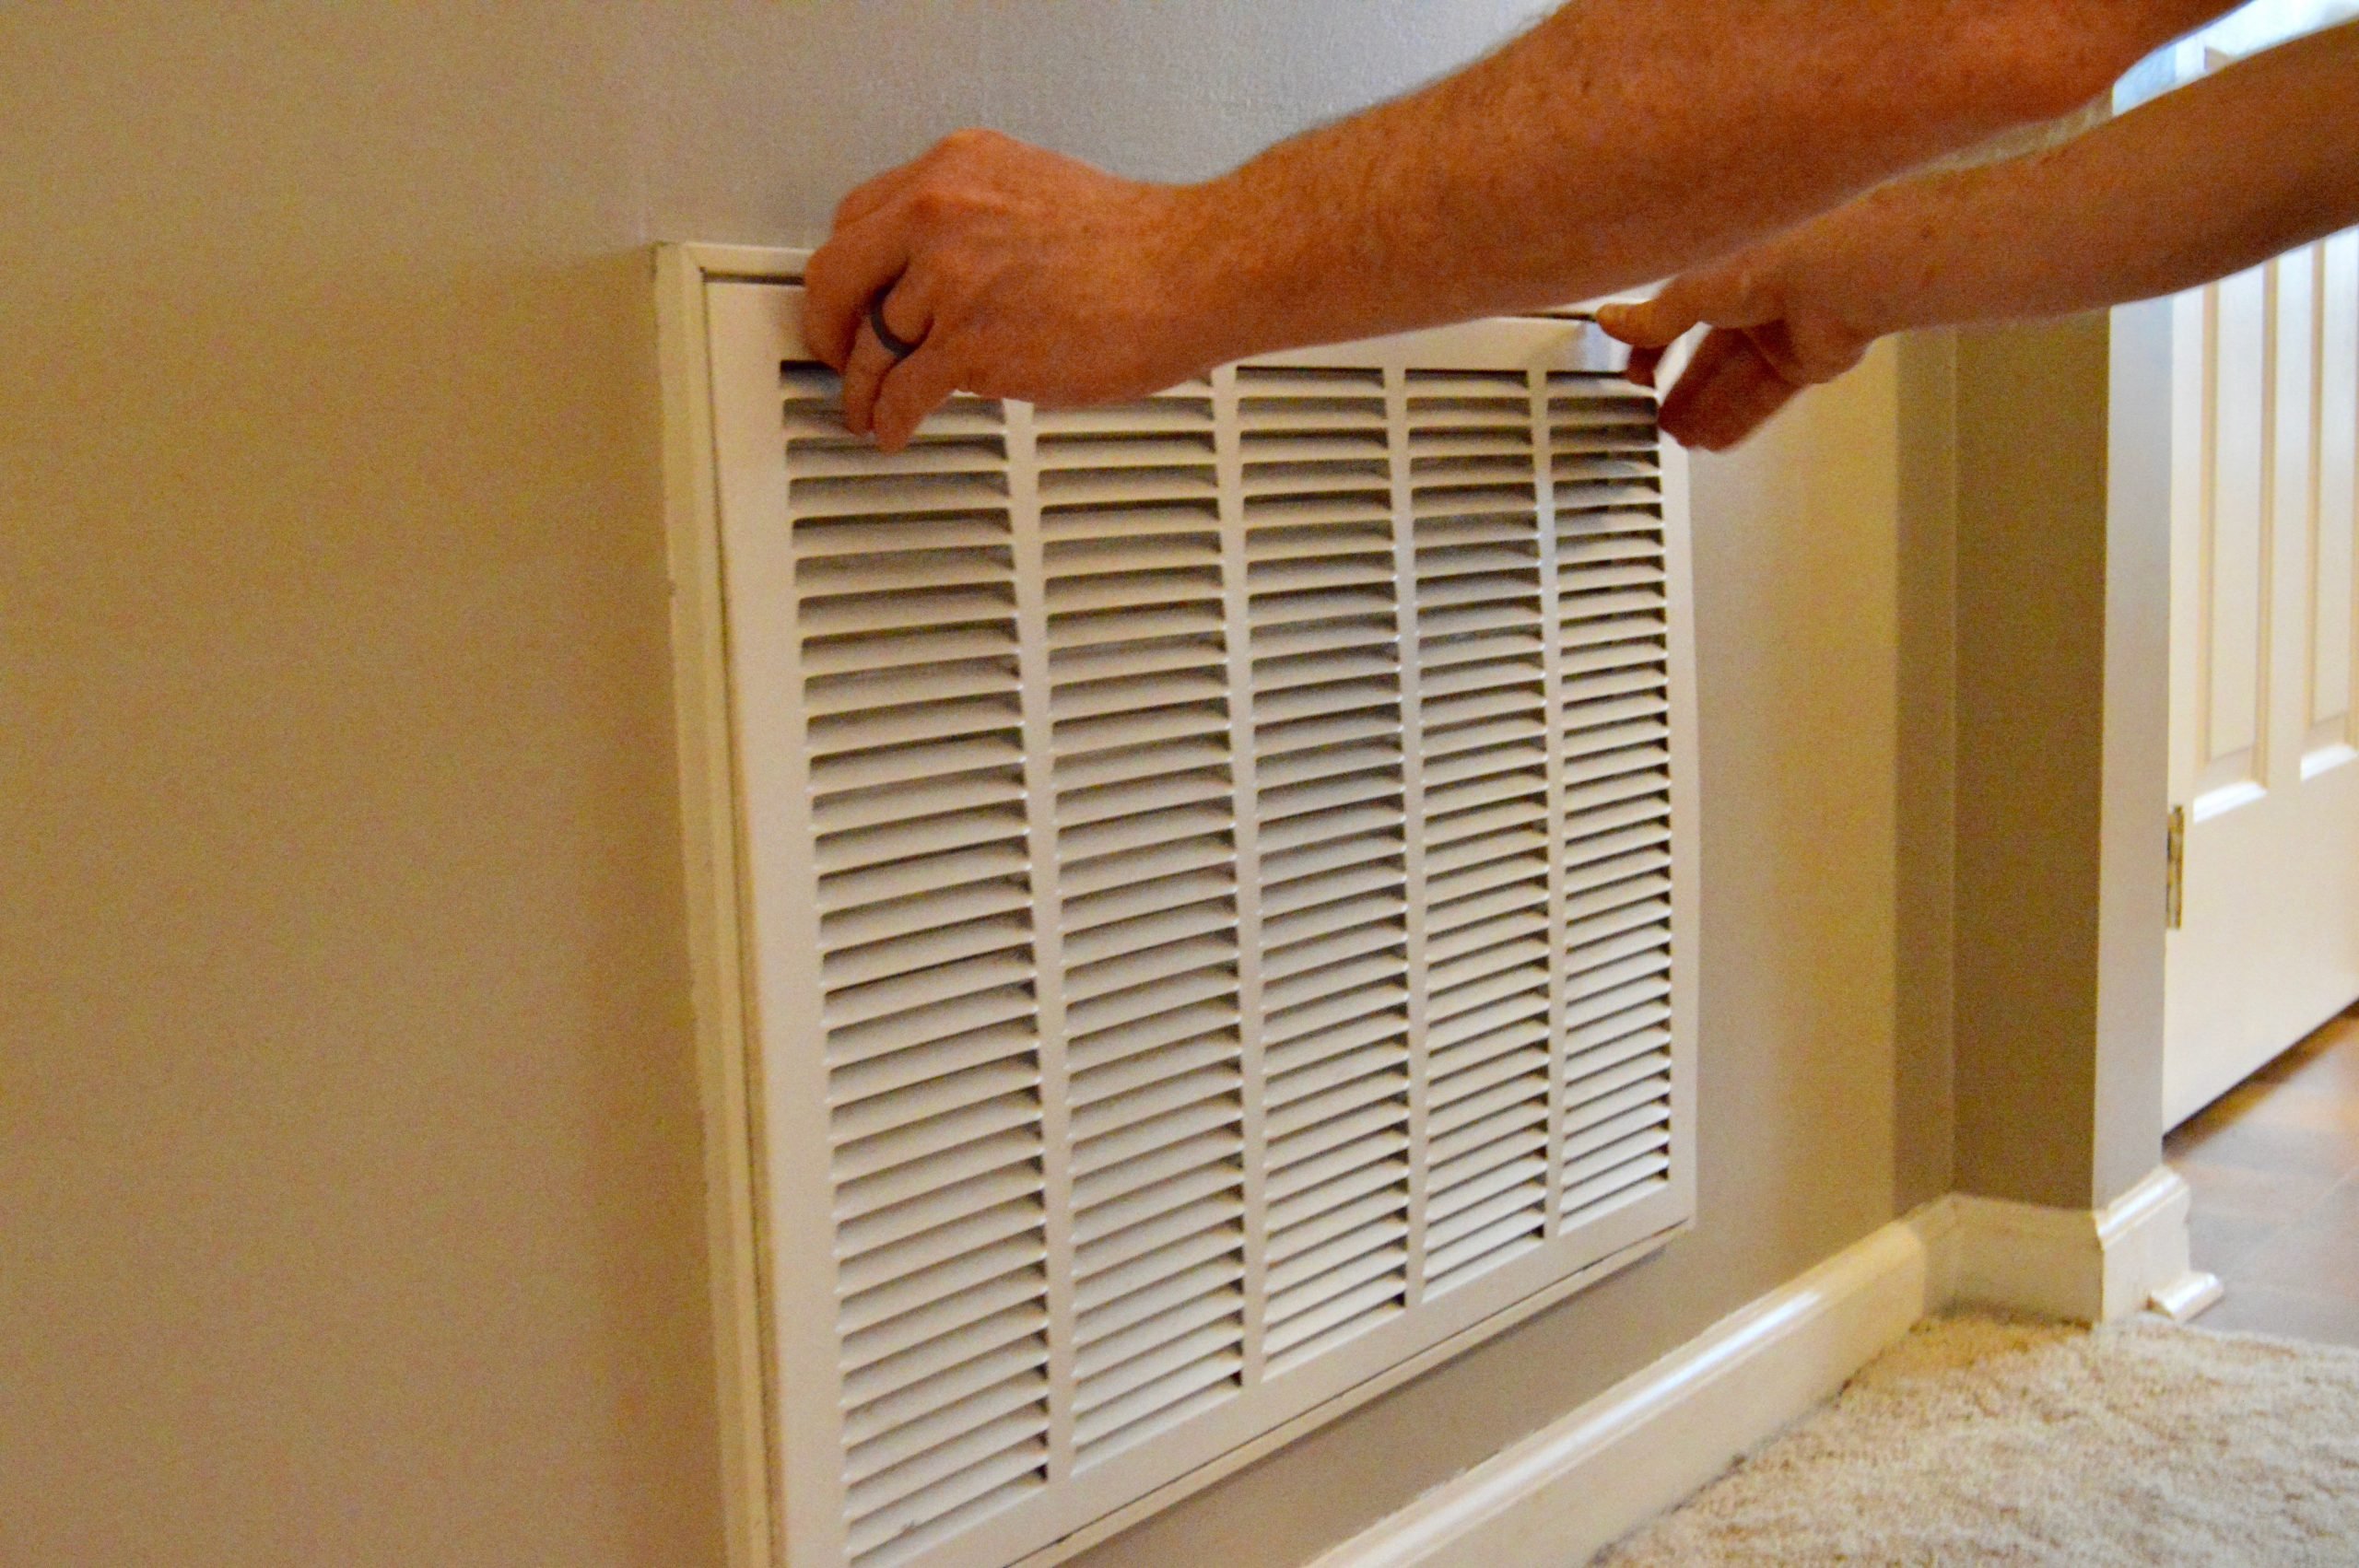 air filter grille grate